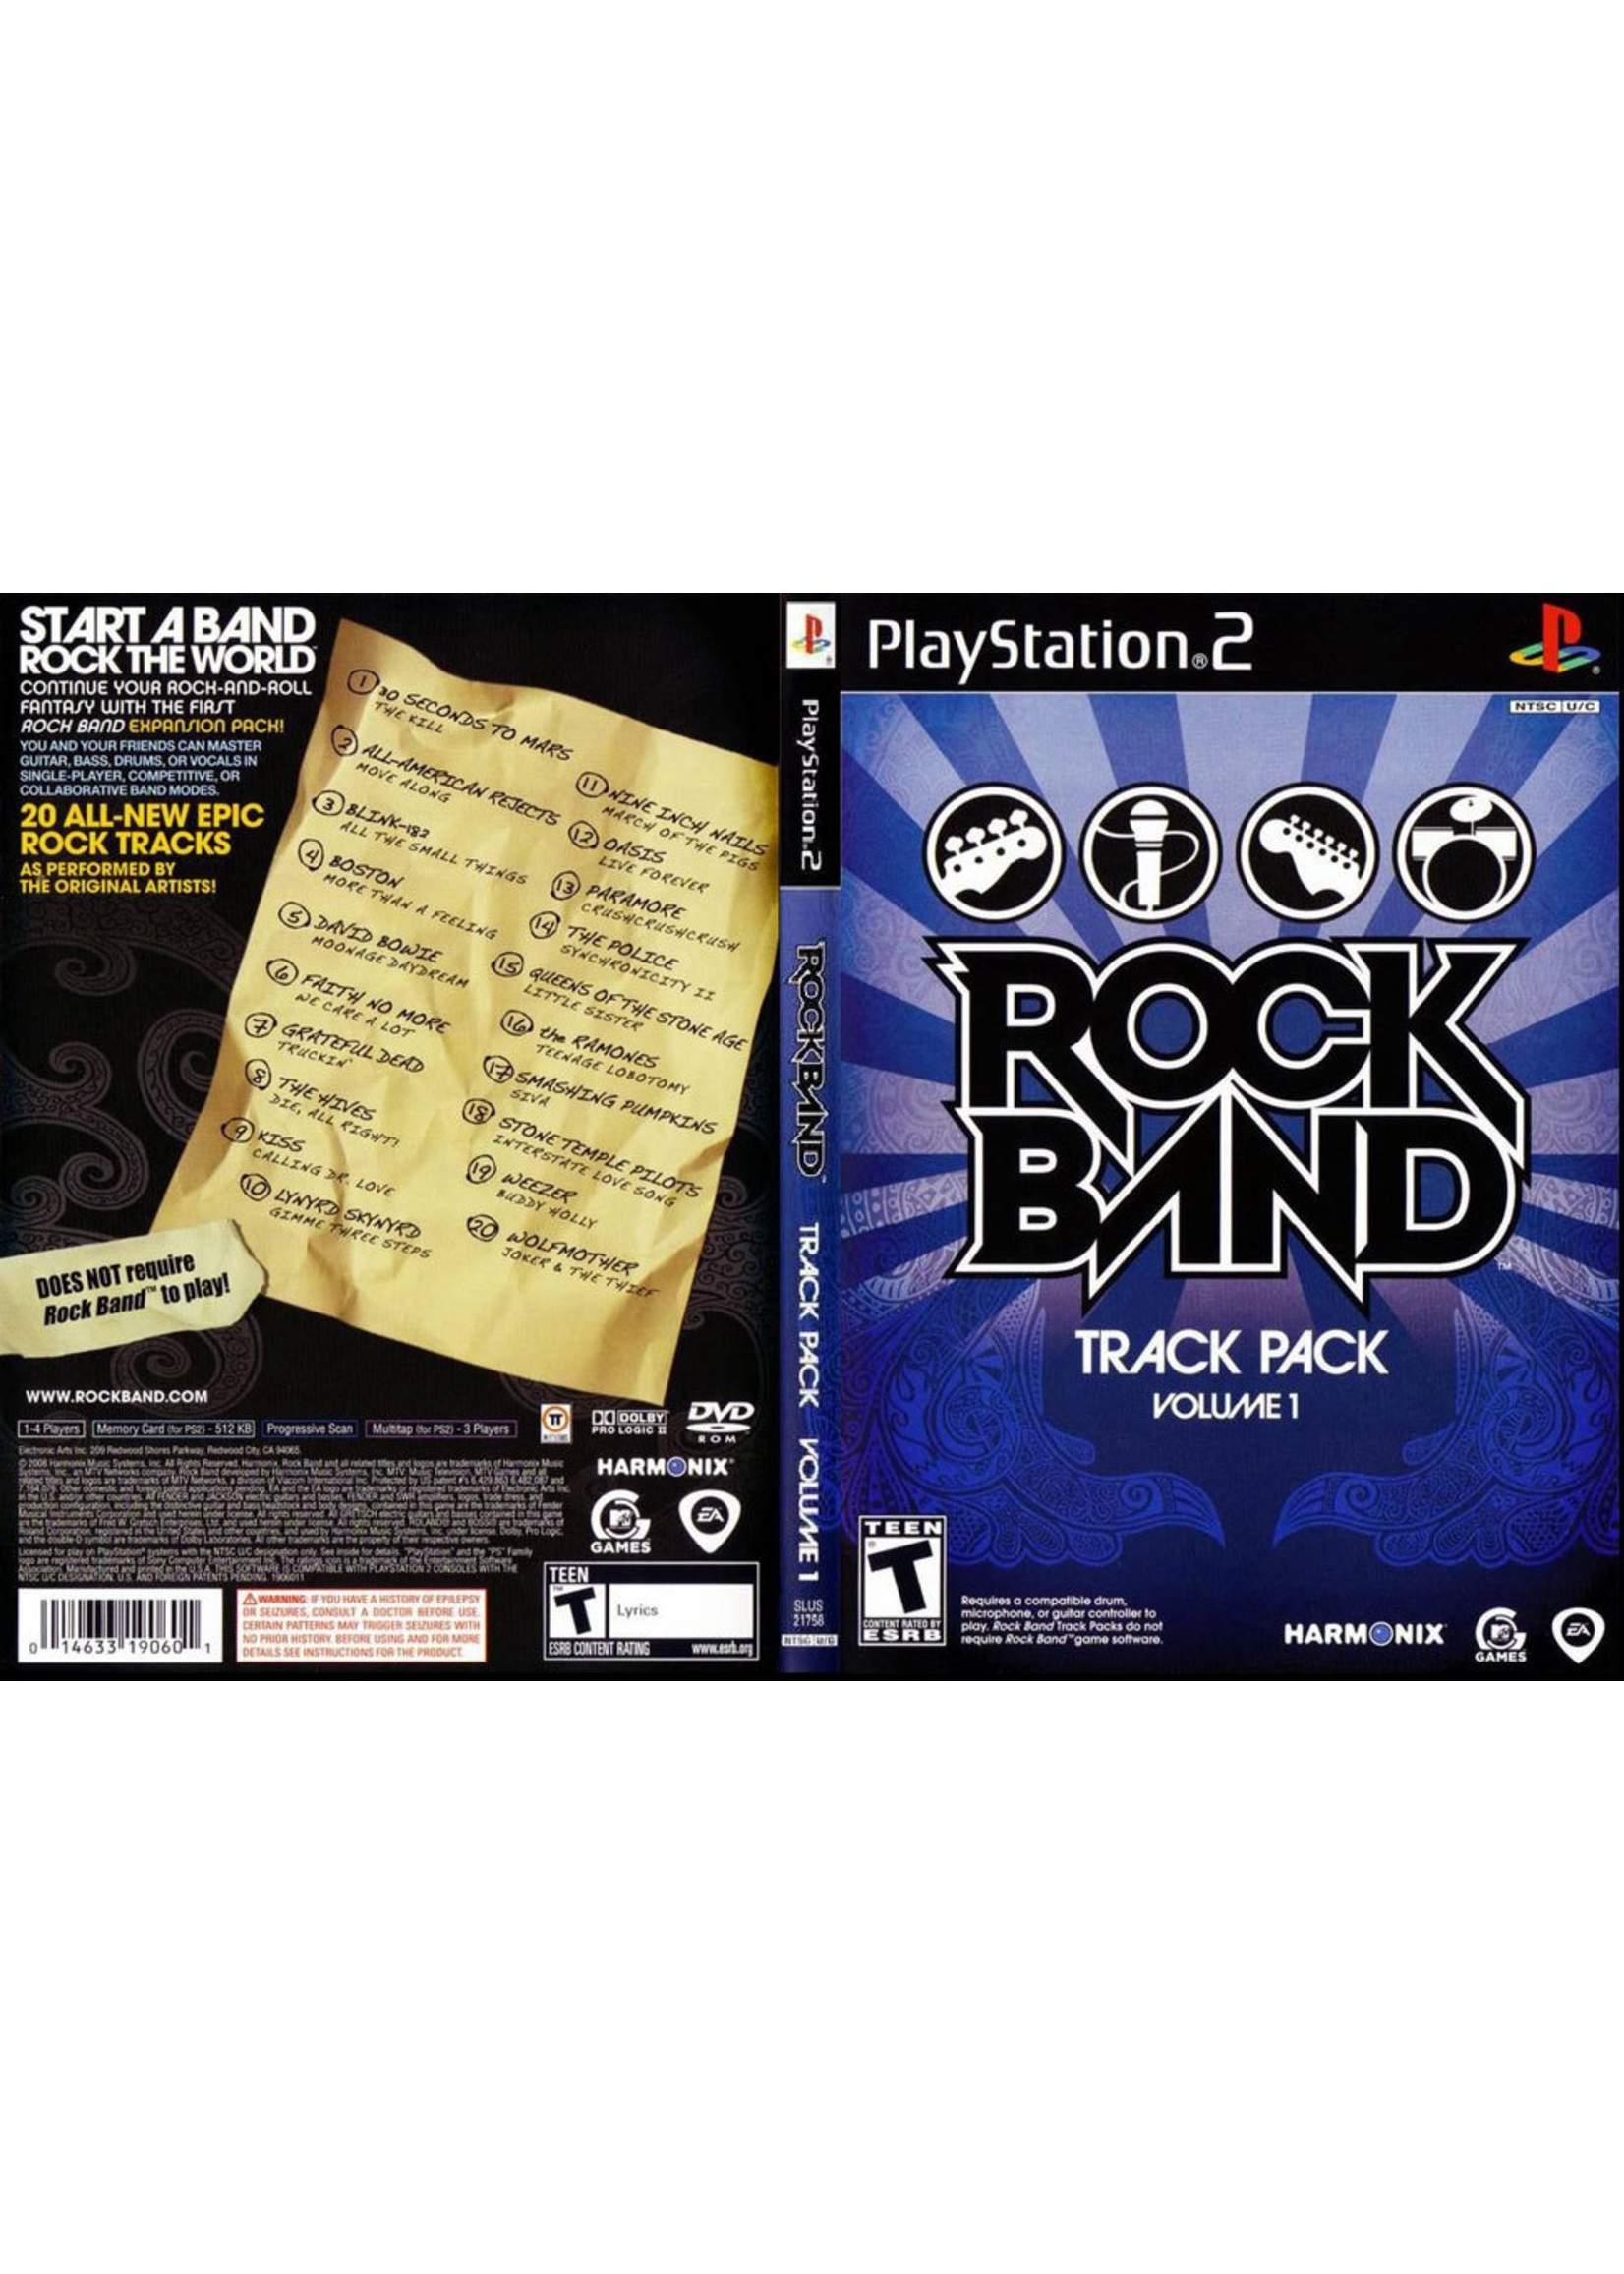 Sony Playstation 2 (PS2) Rock Band Track Pack Volume 1